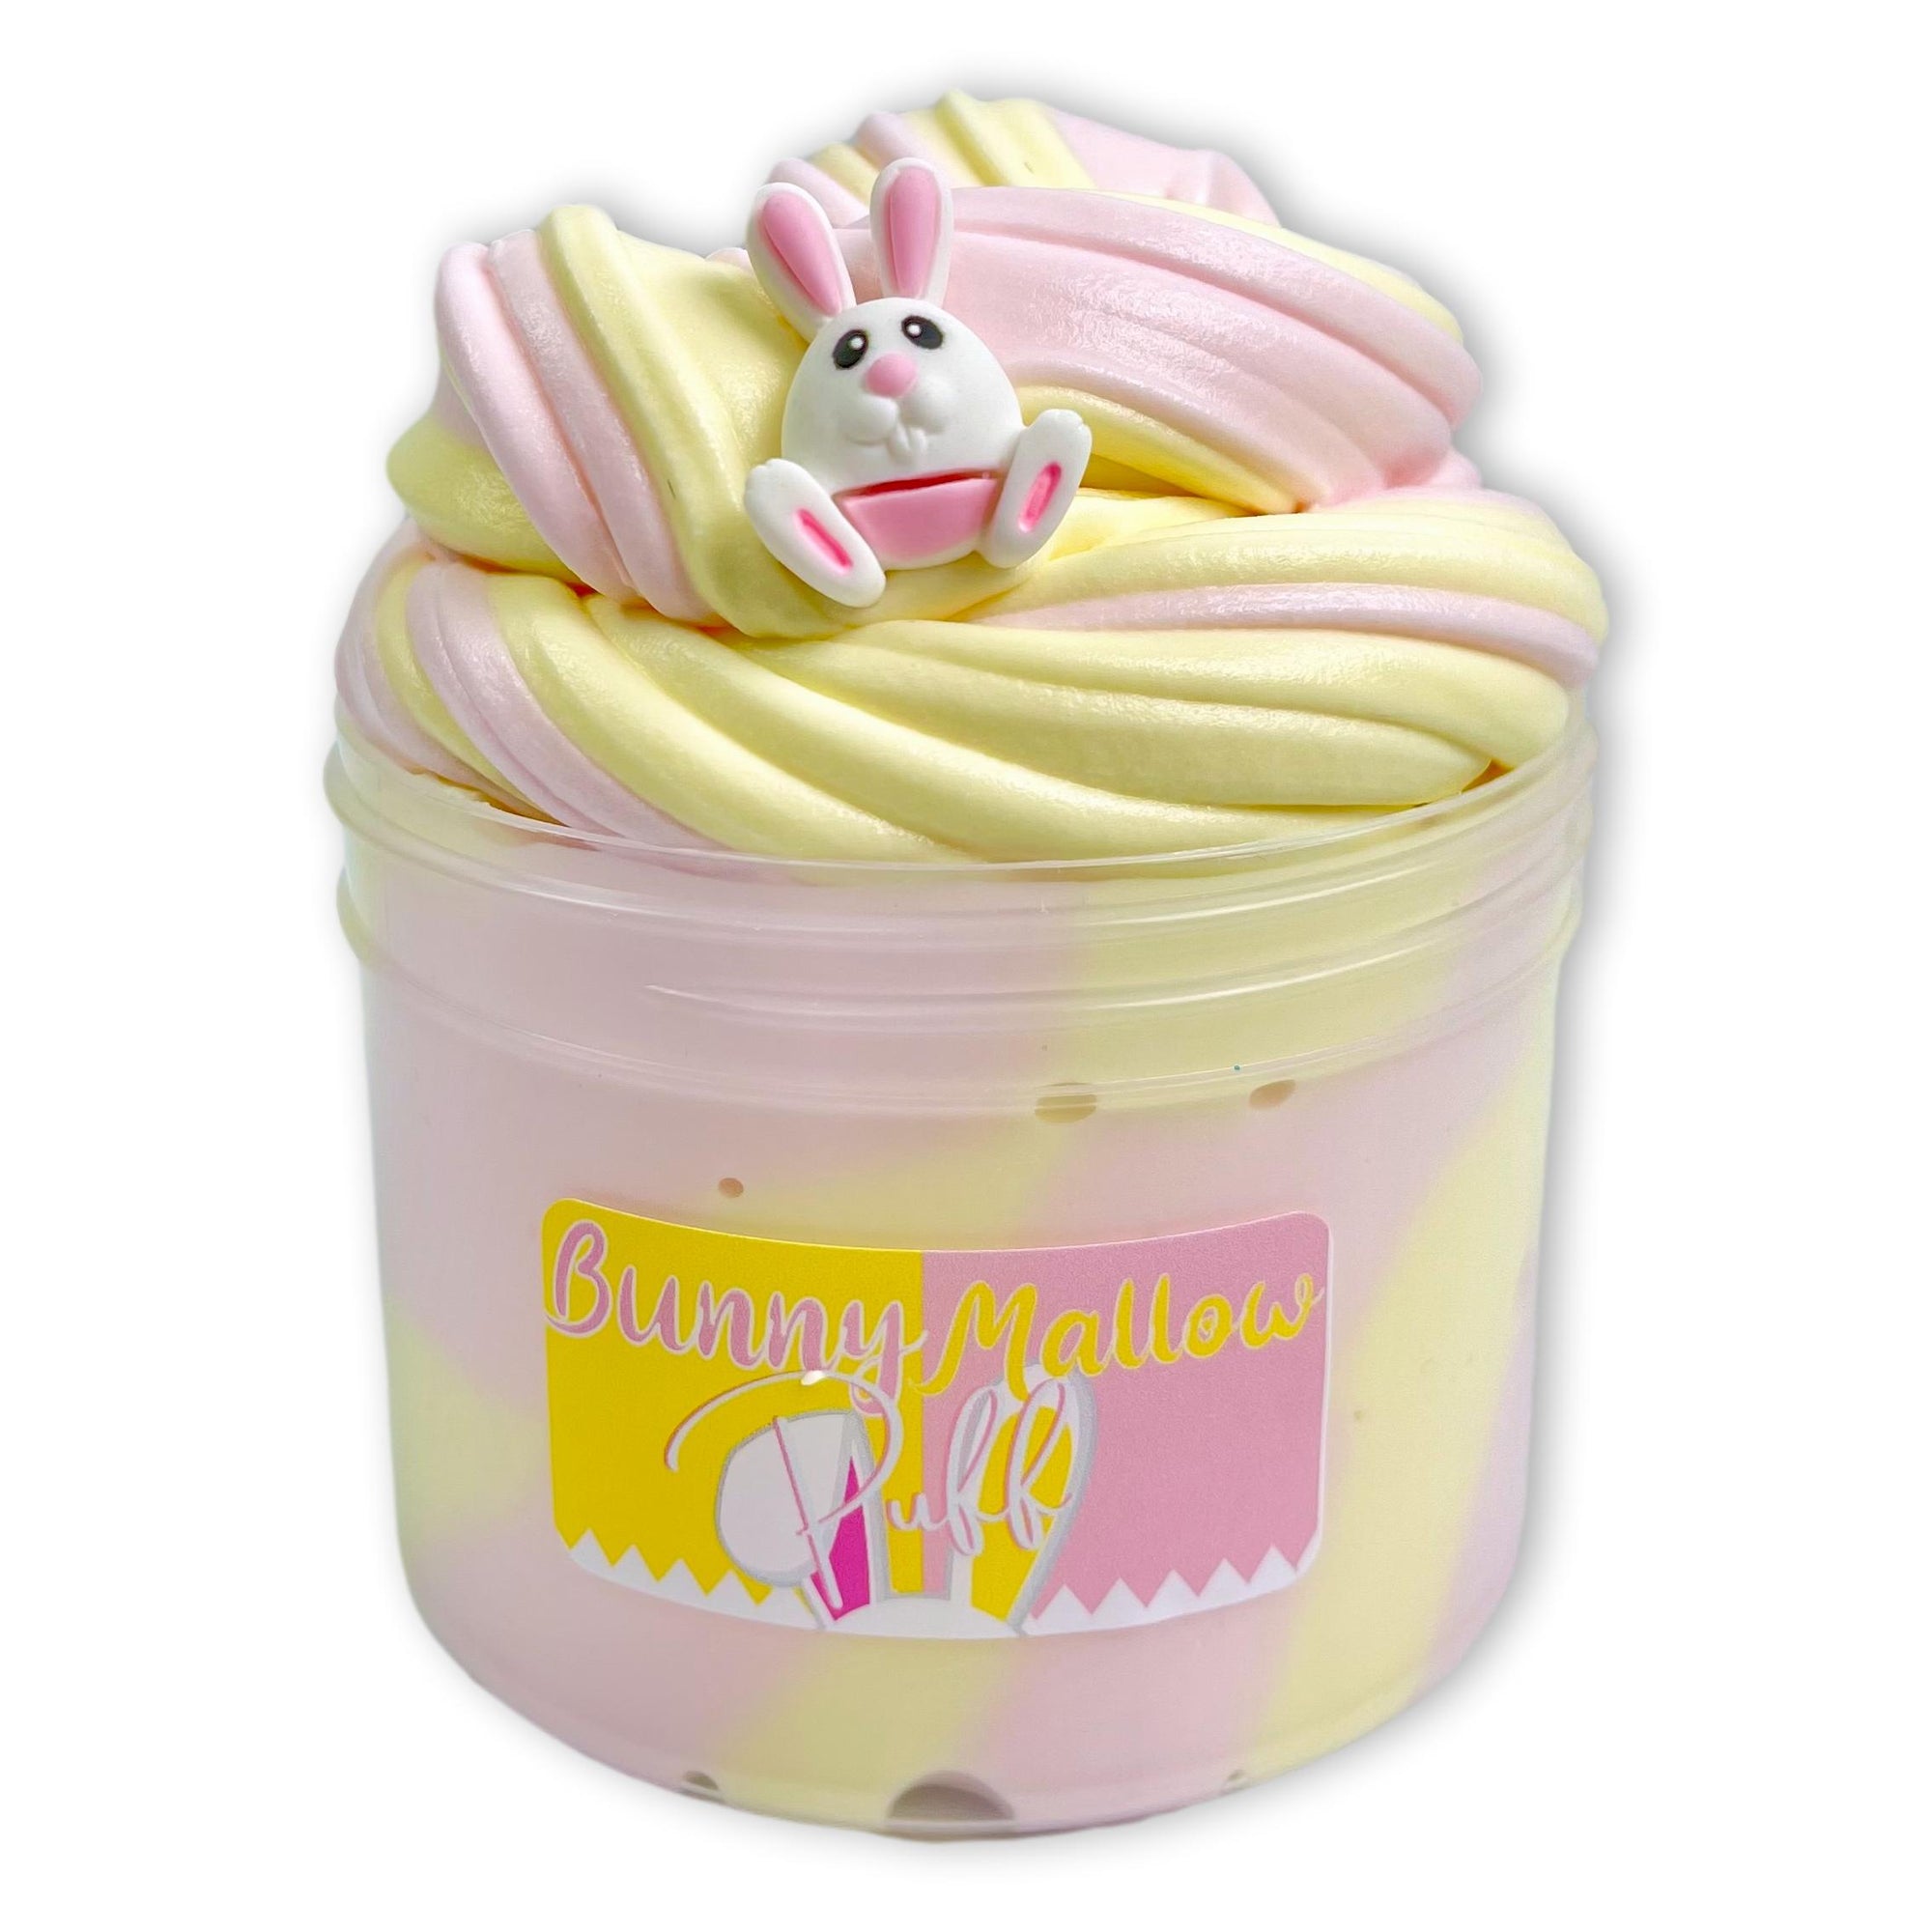 Bunny Mallow Puff Easter Slime - Shop Slime - Dope Slimes